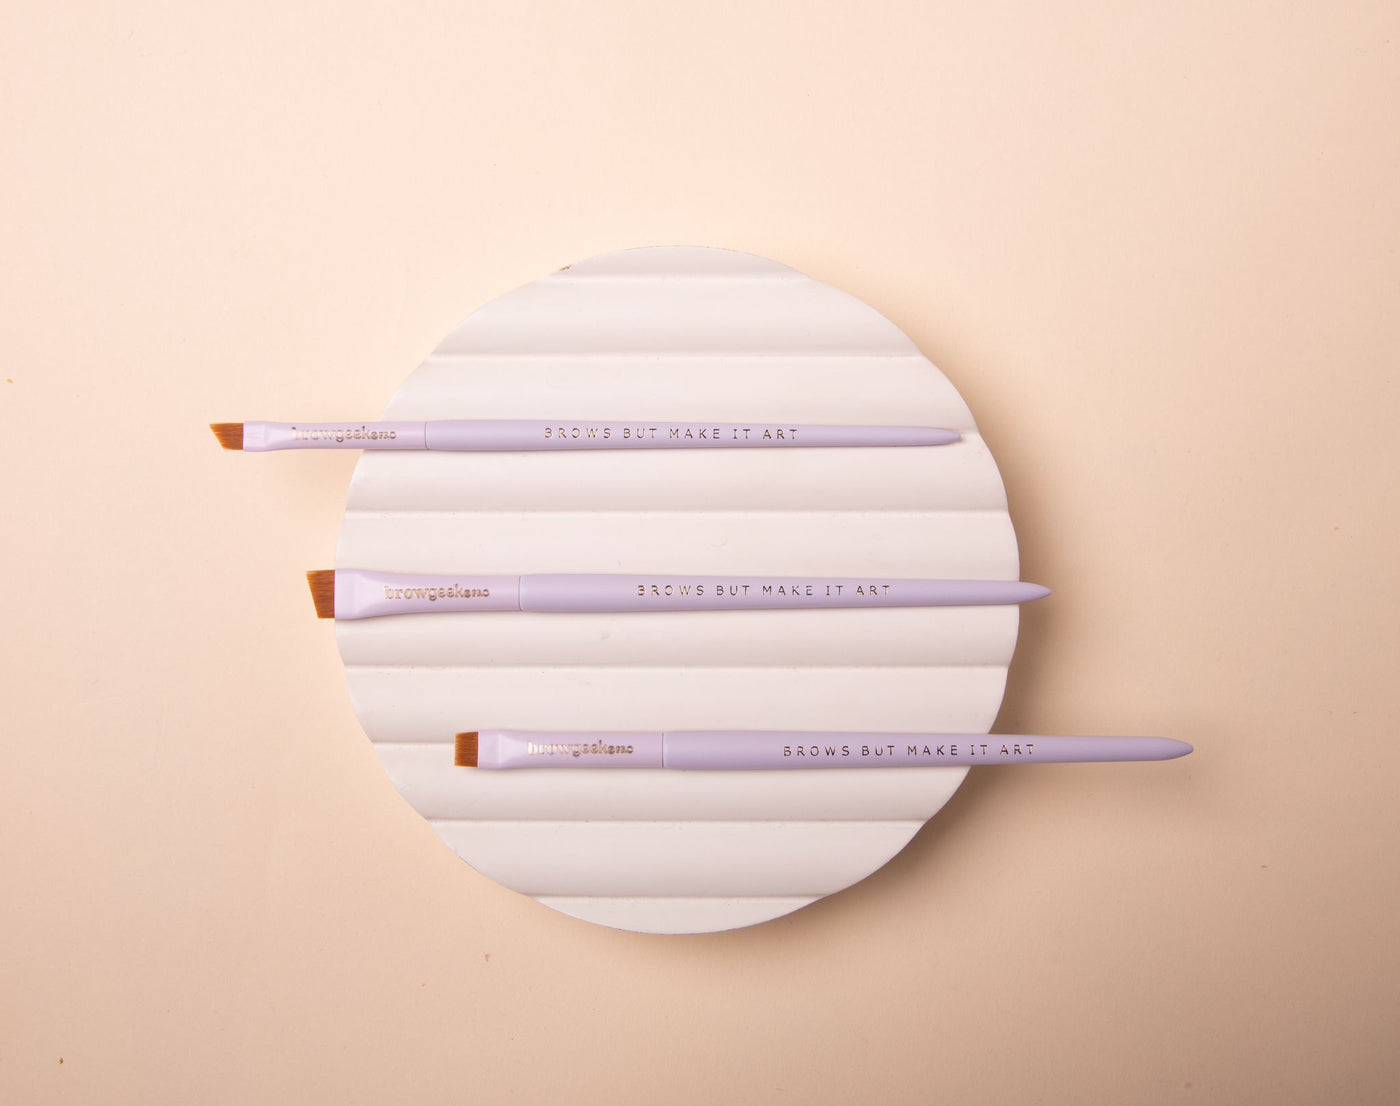 LIMITED EDITION CHATEAUDEBELLE X THE BROW GEEK BRUSH COLLECTION - Brows but make it art 💜